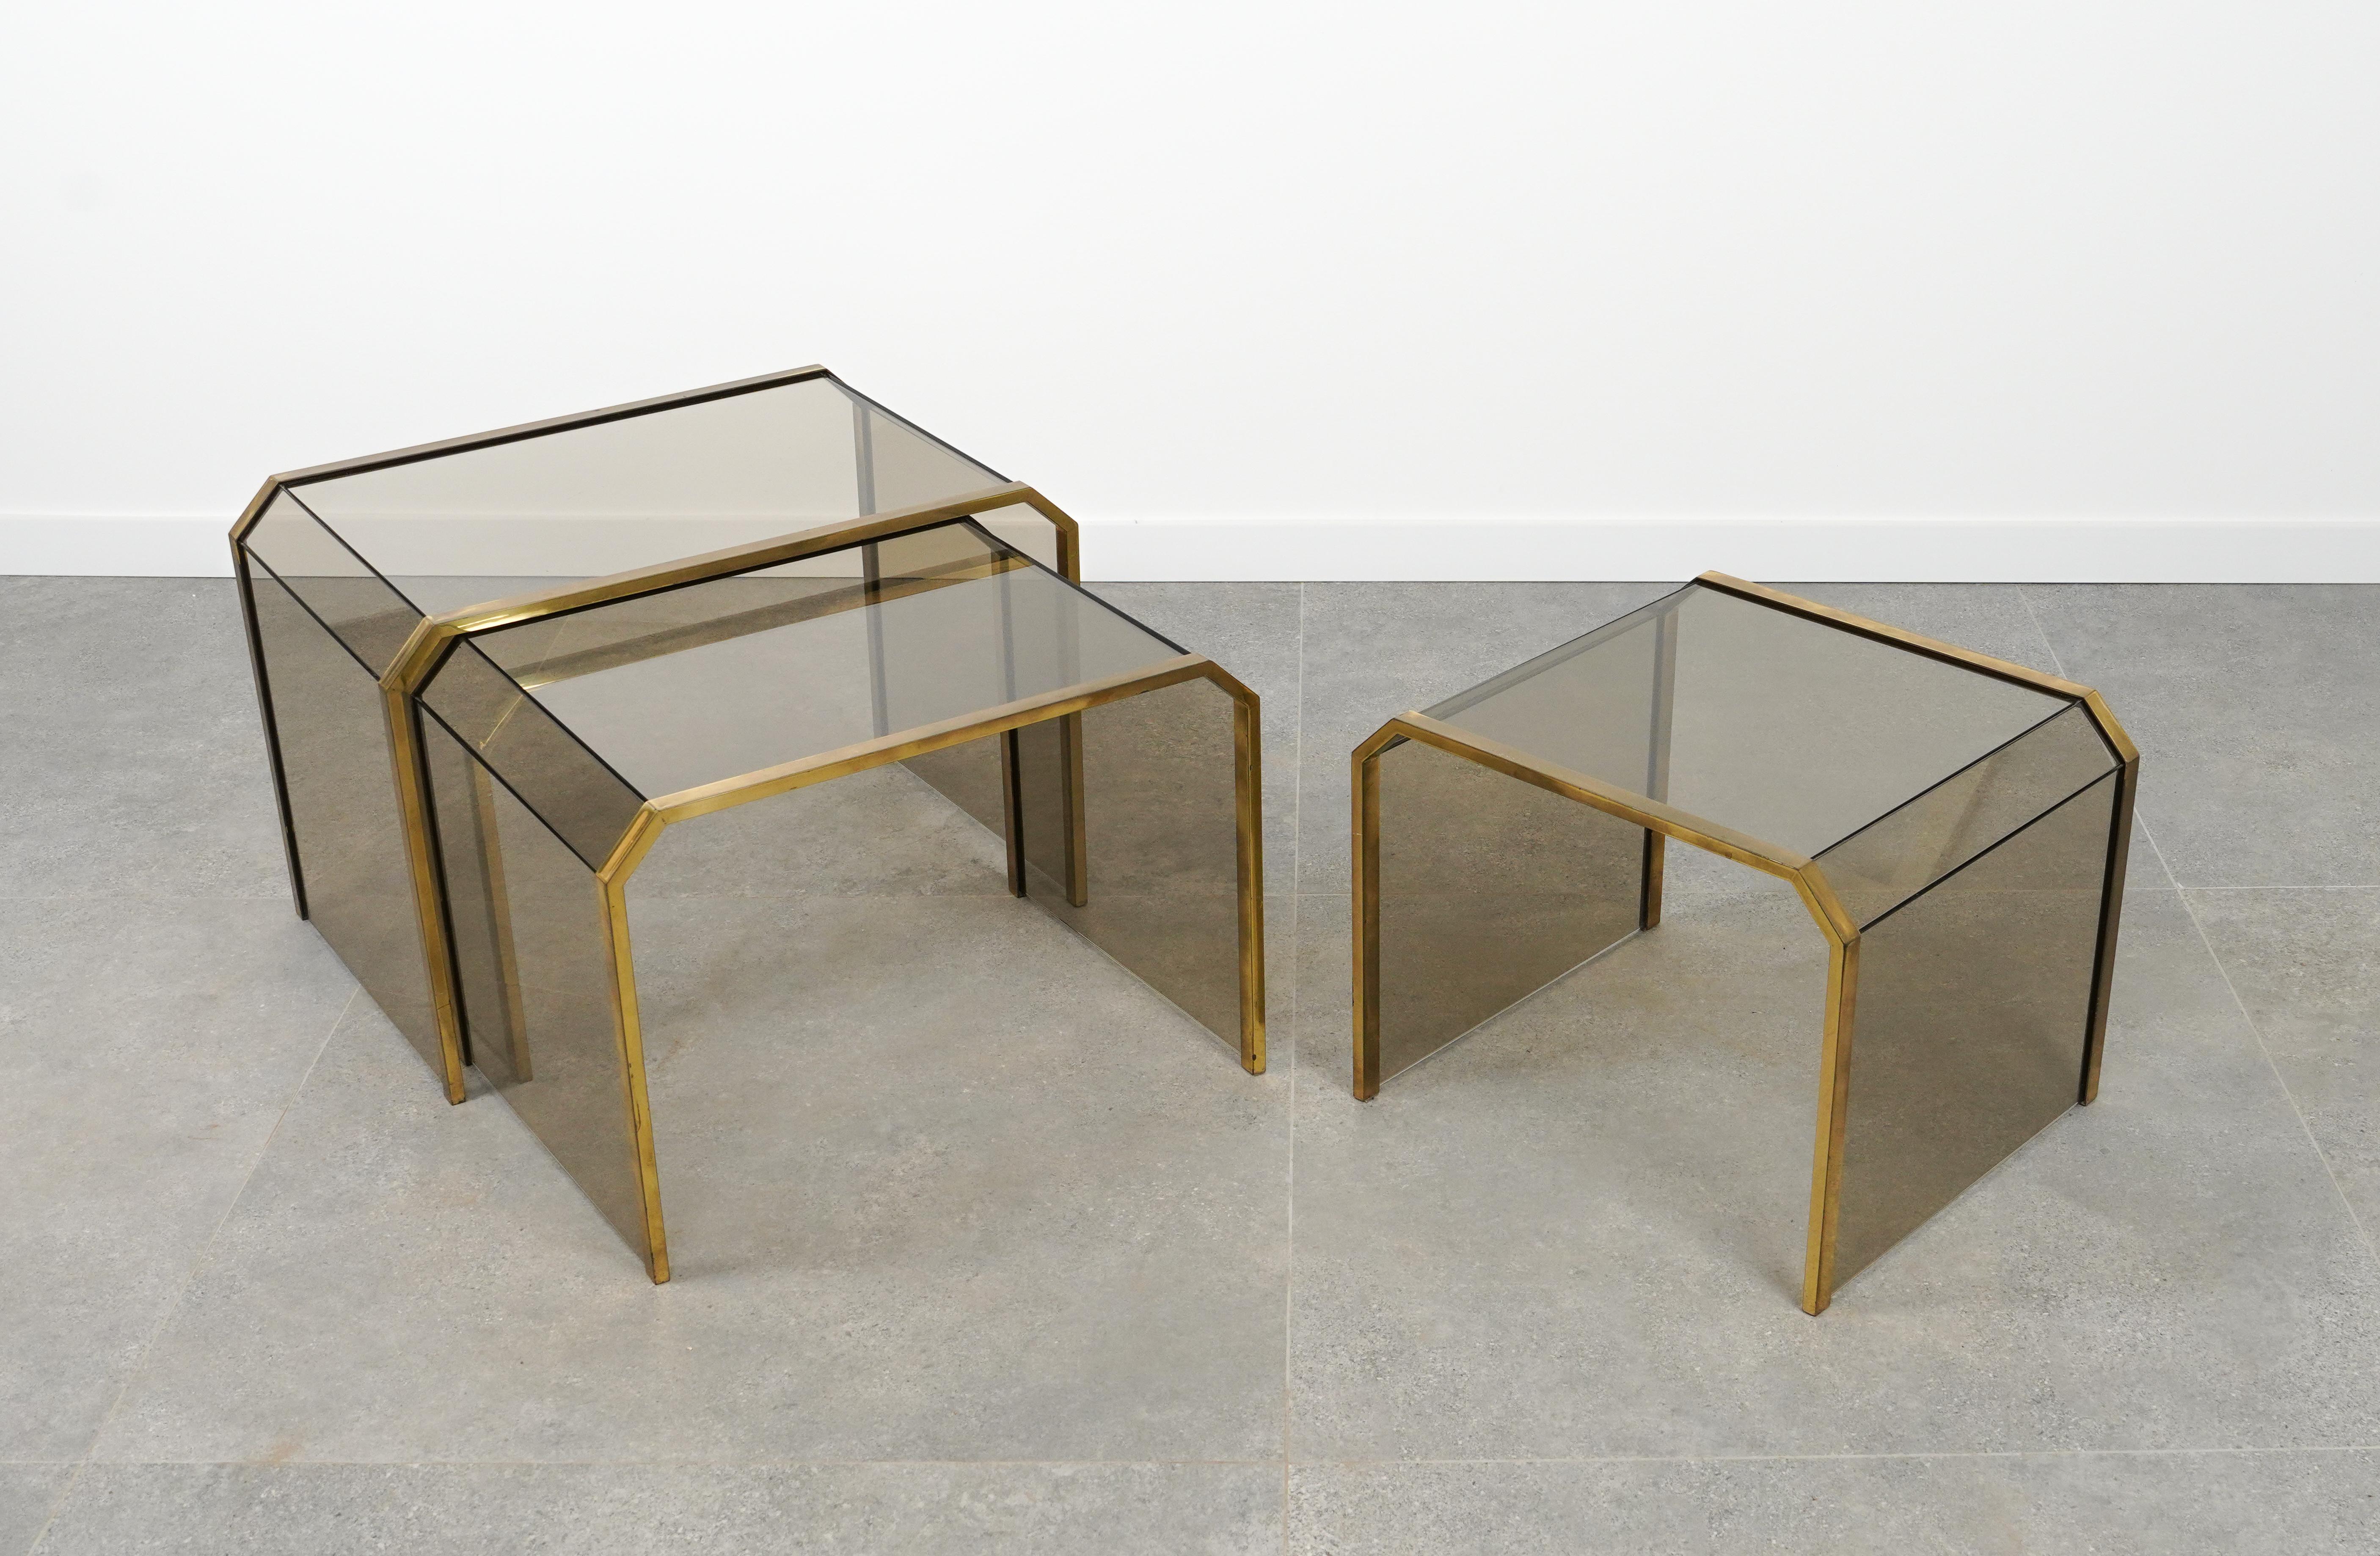 Brass & Glass Set of Three Nesting Tables Gallotti & Radice Style, Italy 1970s For Sale 1